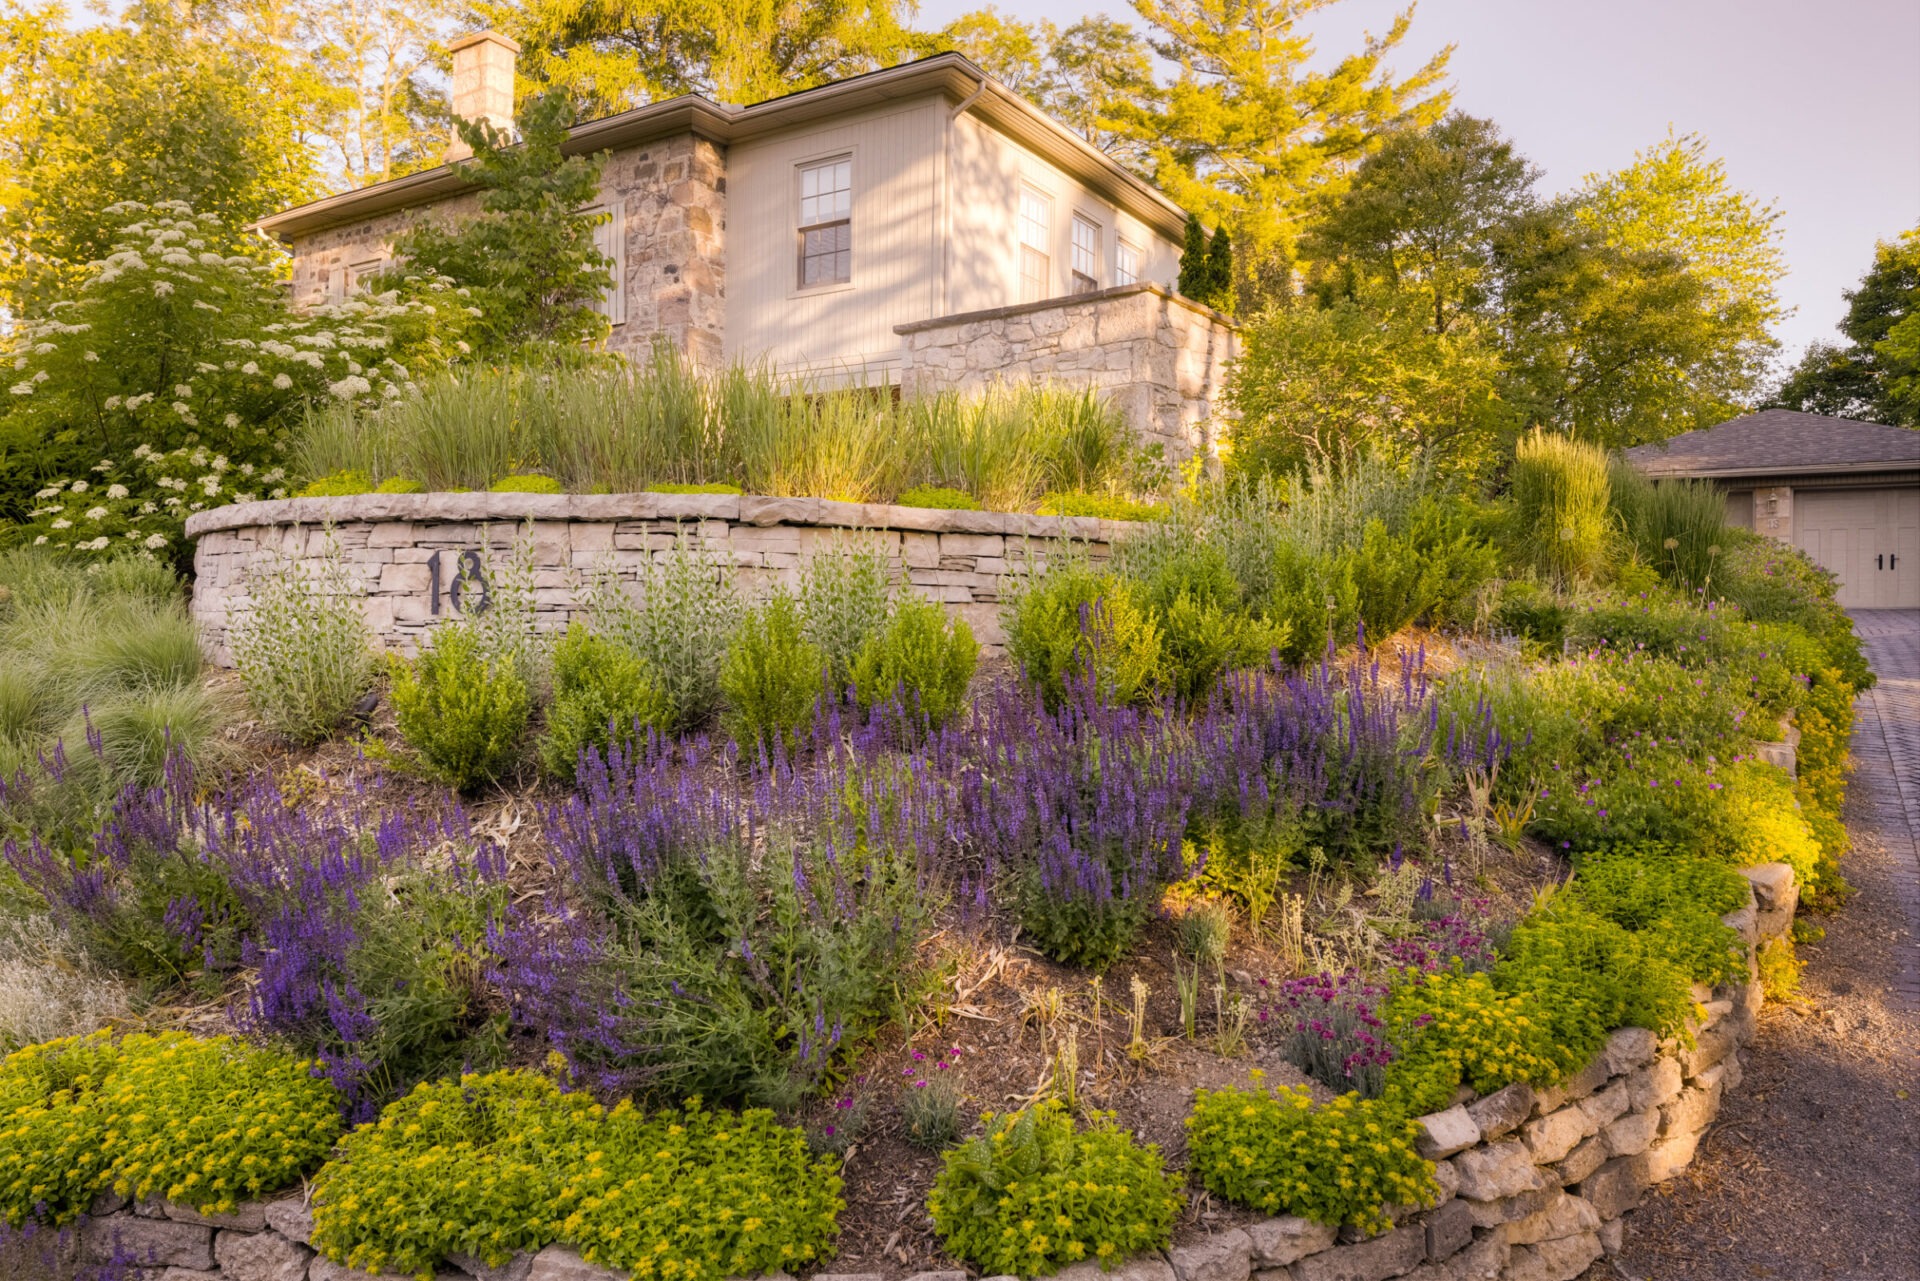 A terraced garden with stone walls featuring lush lavender plants, green shrubbery, and a house partially visible in the background at sunset.